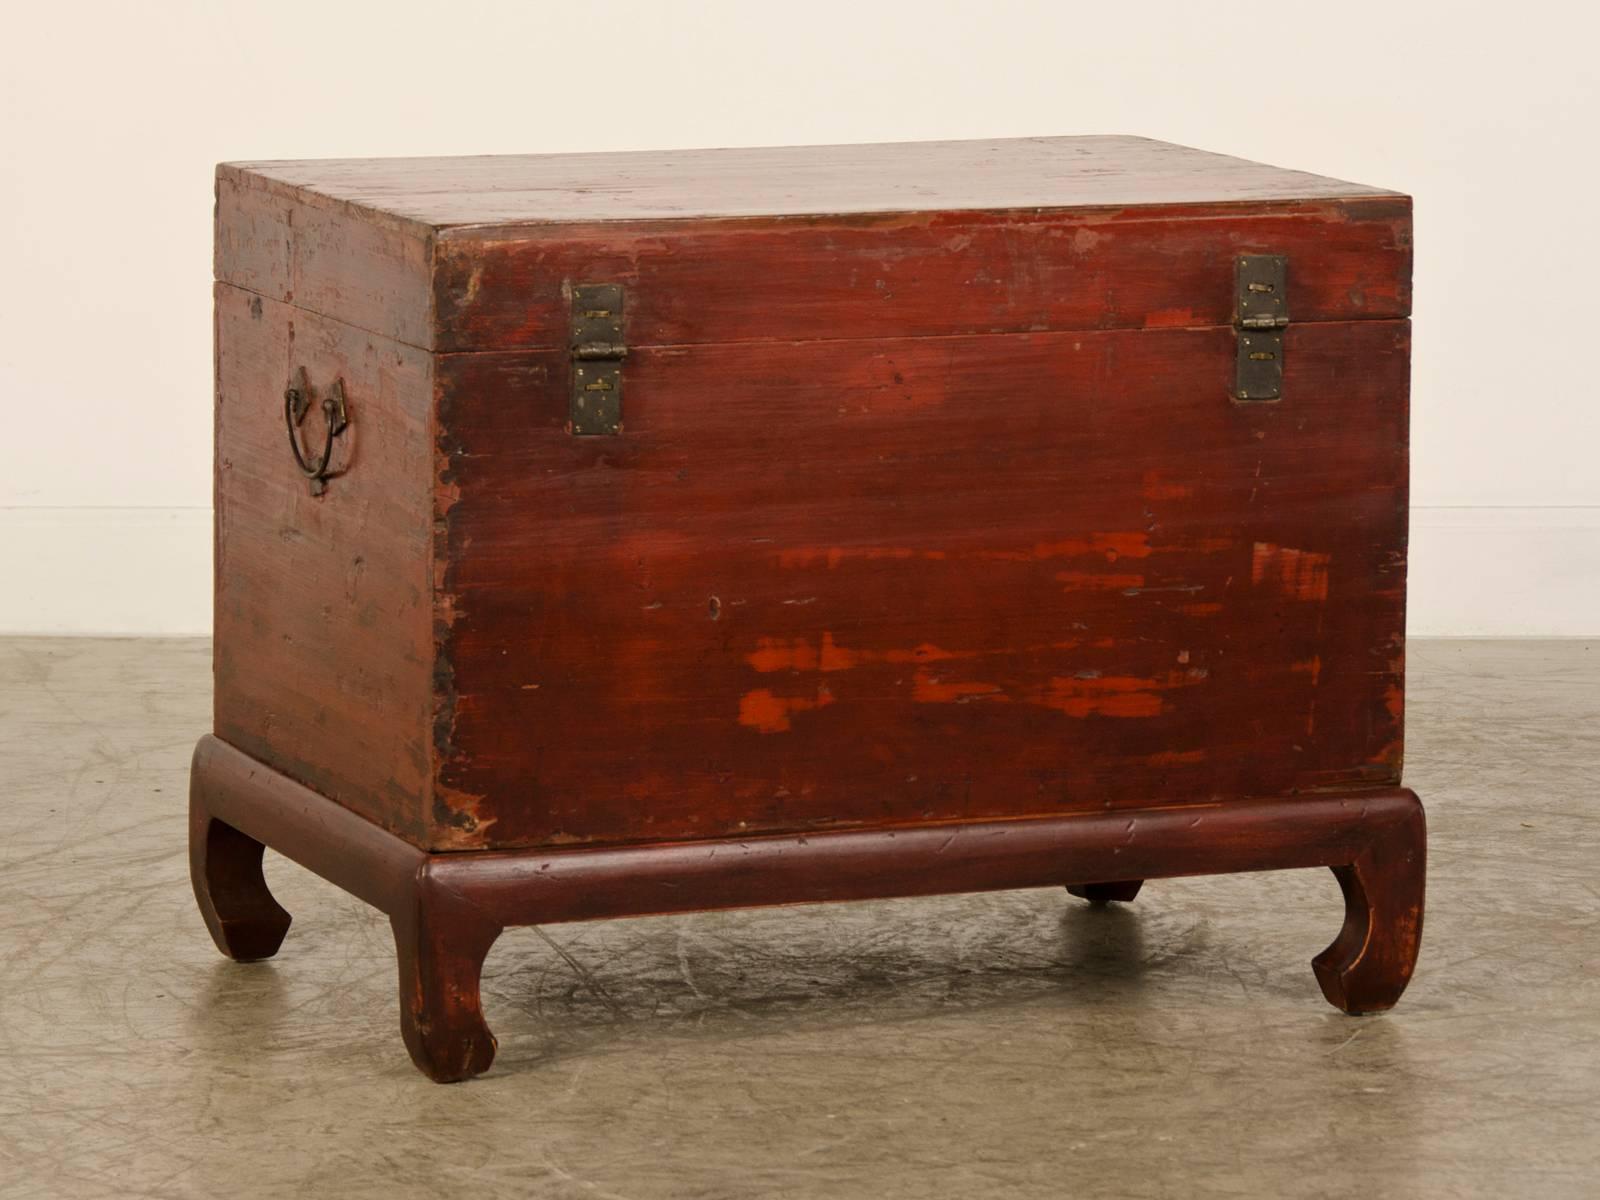 Wood Red Lacquer Antique Chinese Trunk Kuang Hsu Period, circa 1875 For Sale